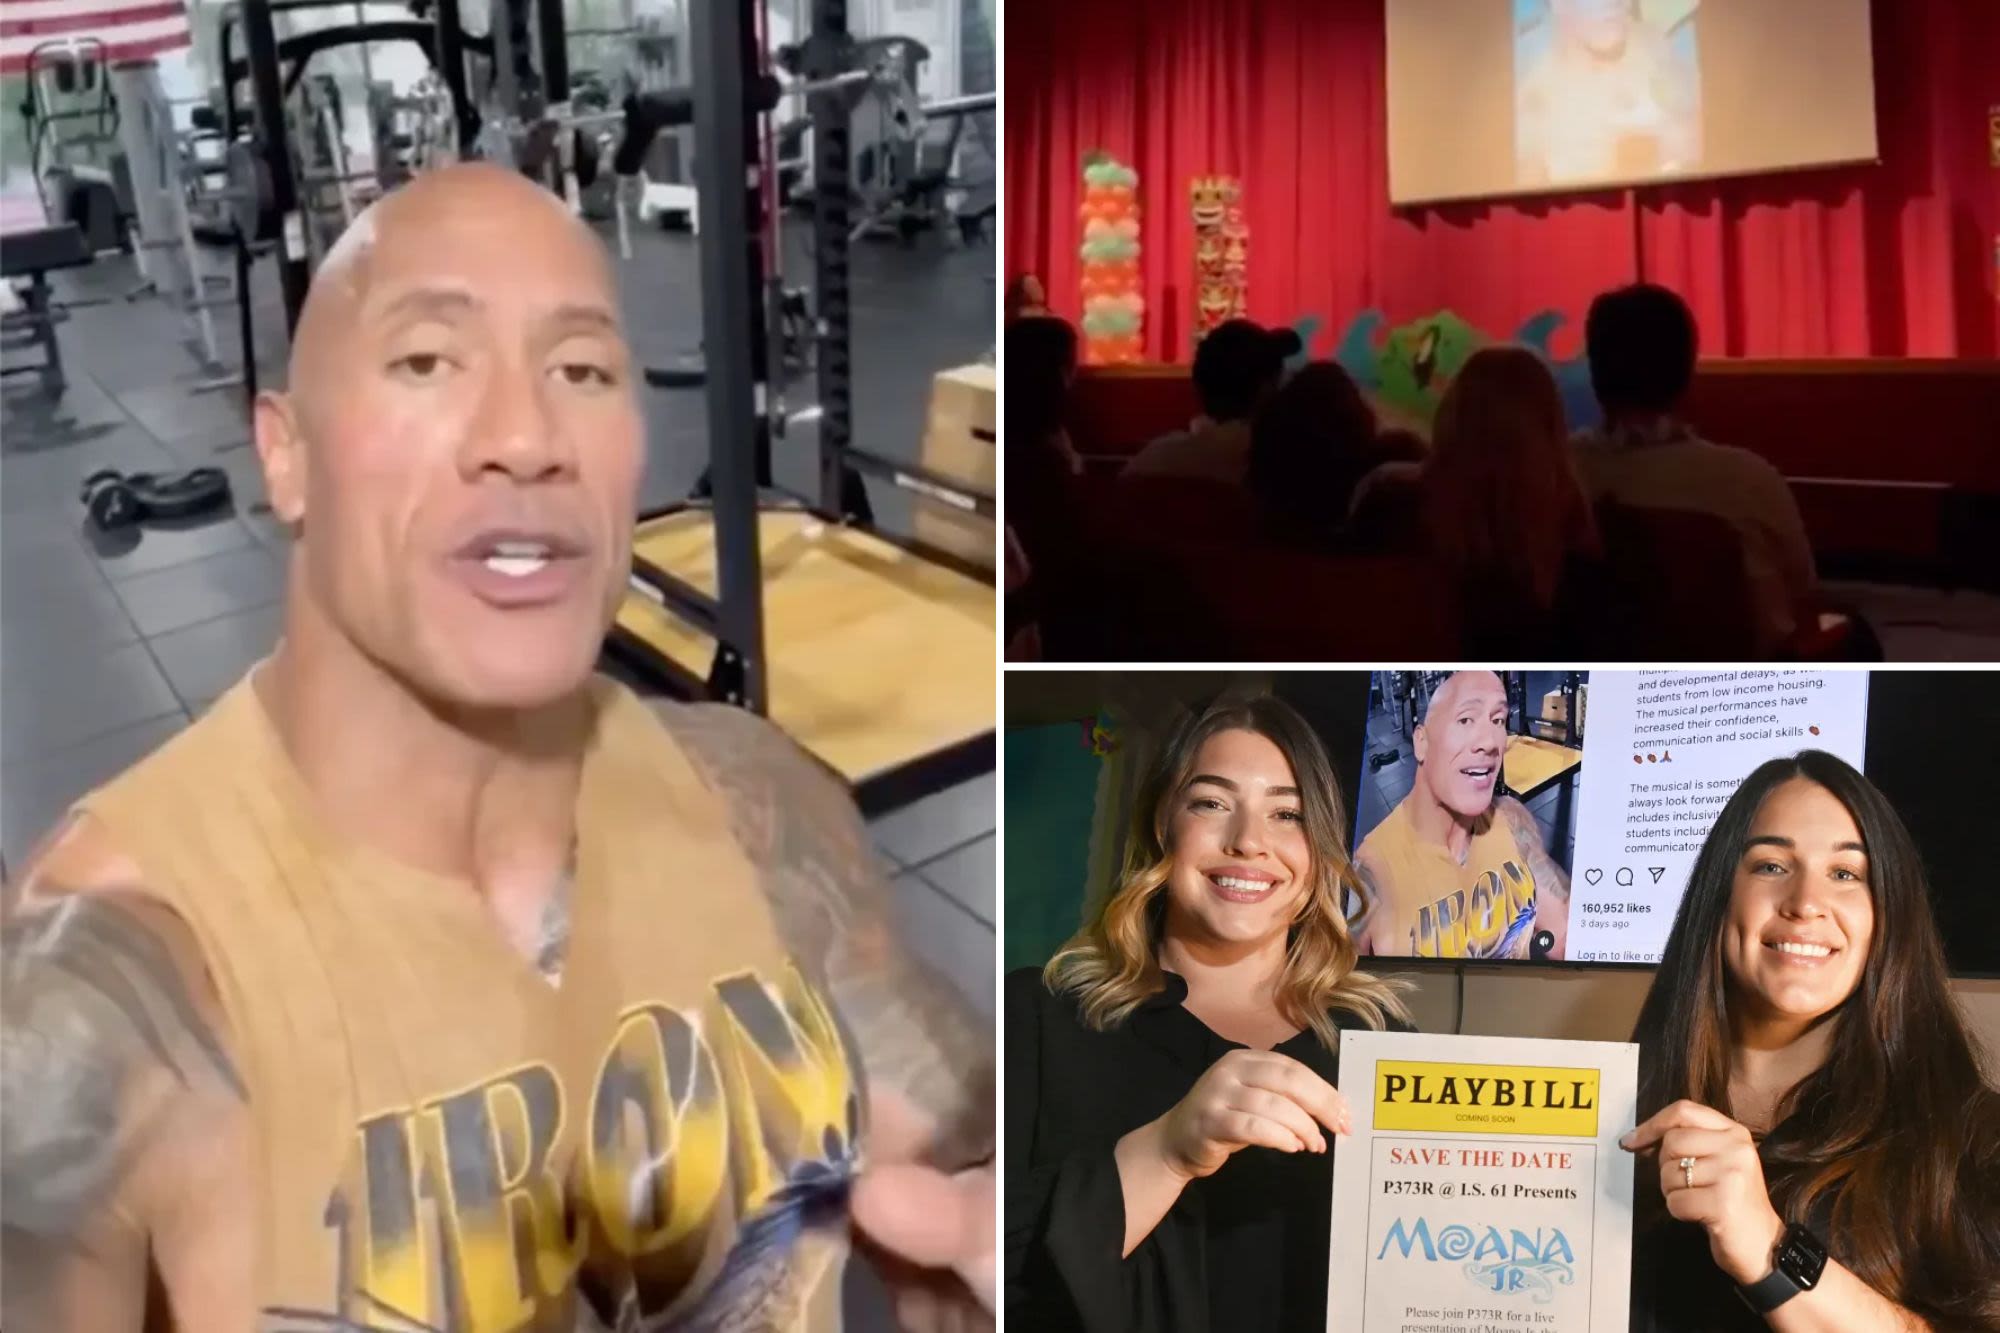 School of Rock: NYC students shocked when Dwayne Johnson serenades them with video message